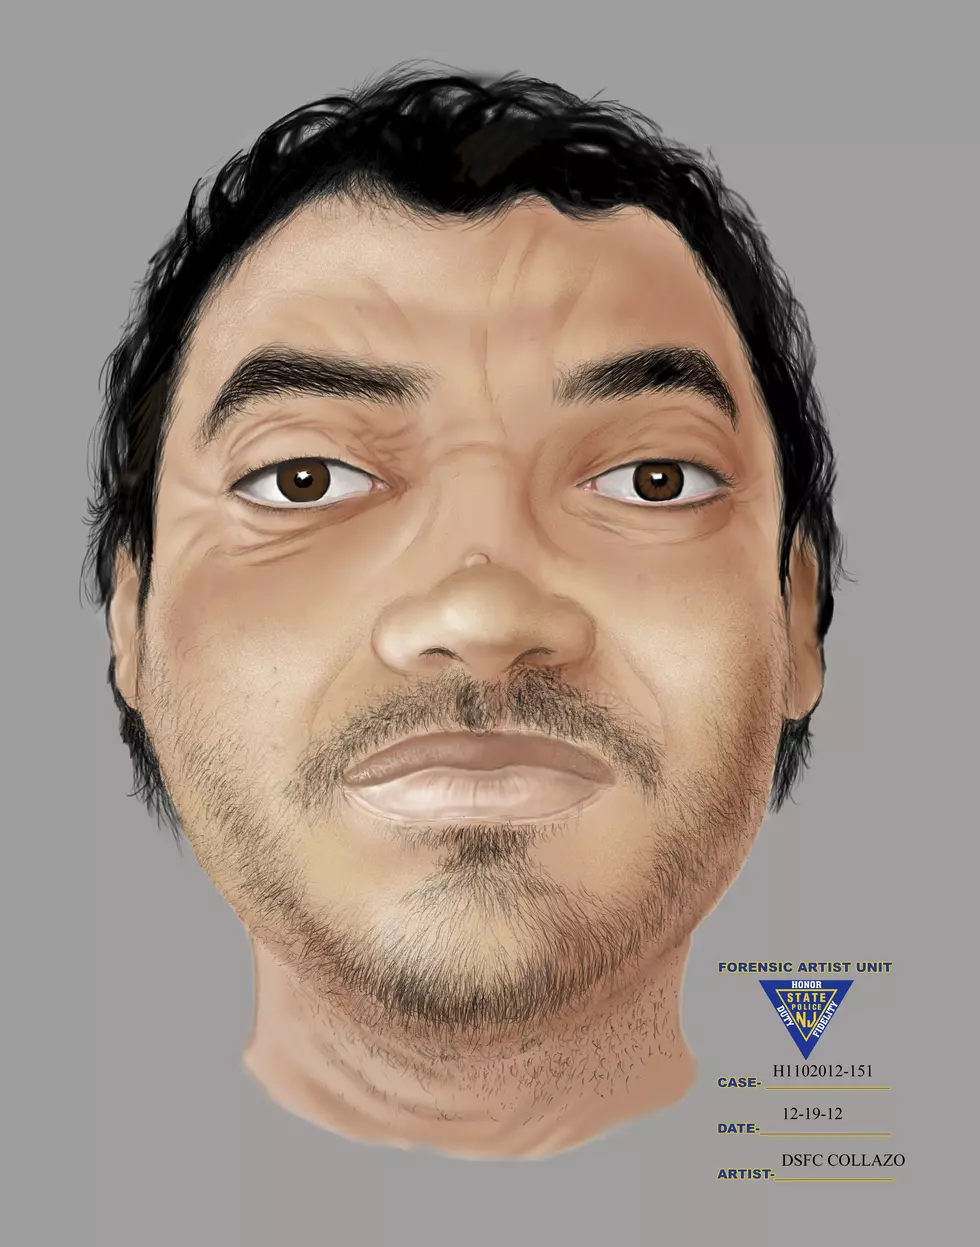 Do You Recognize Him? Dead Man’s Identity Still Unknown after 18 Months